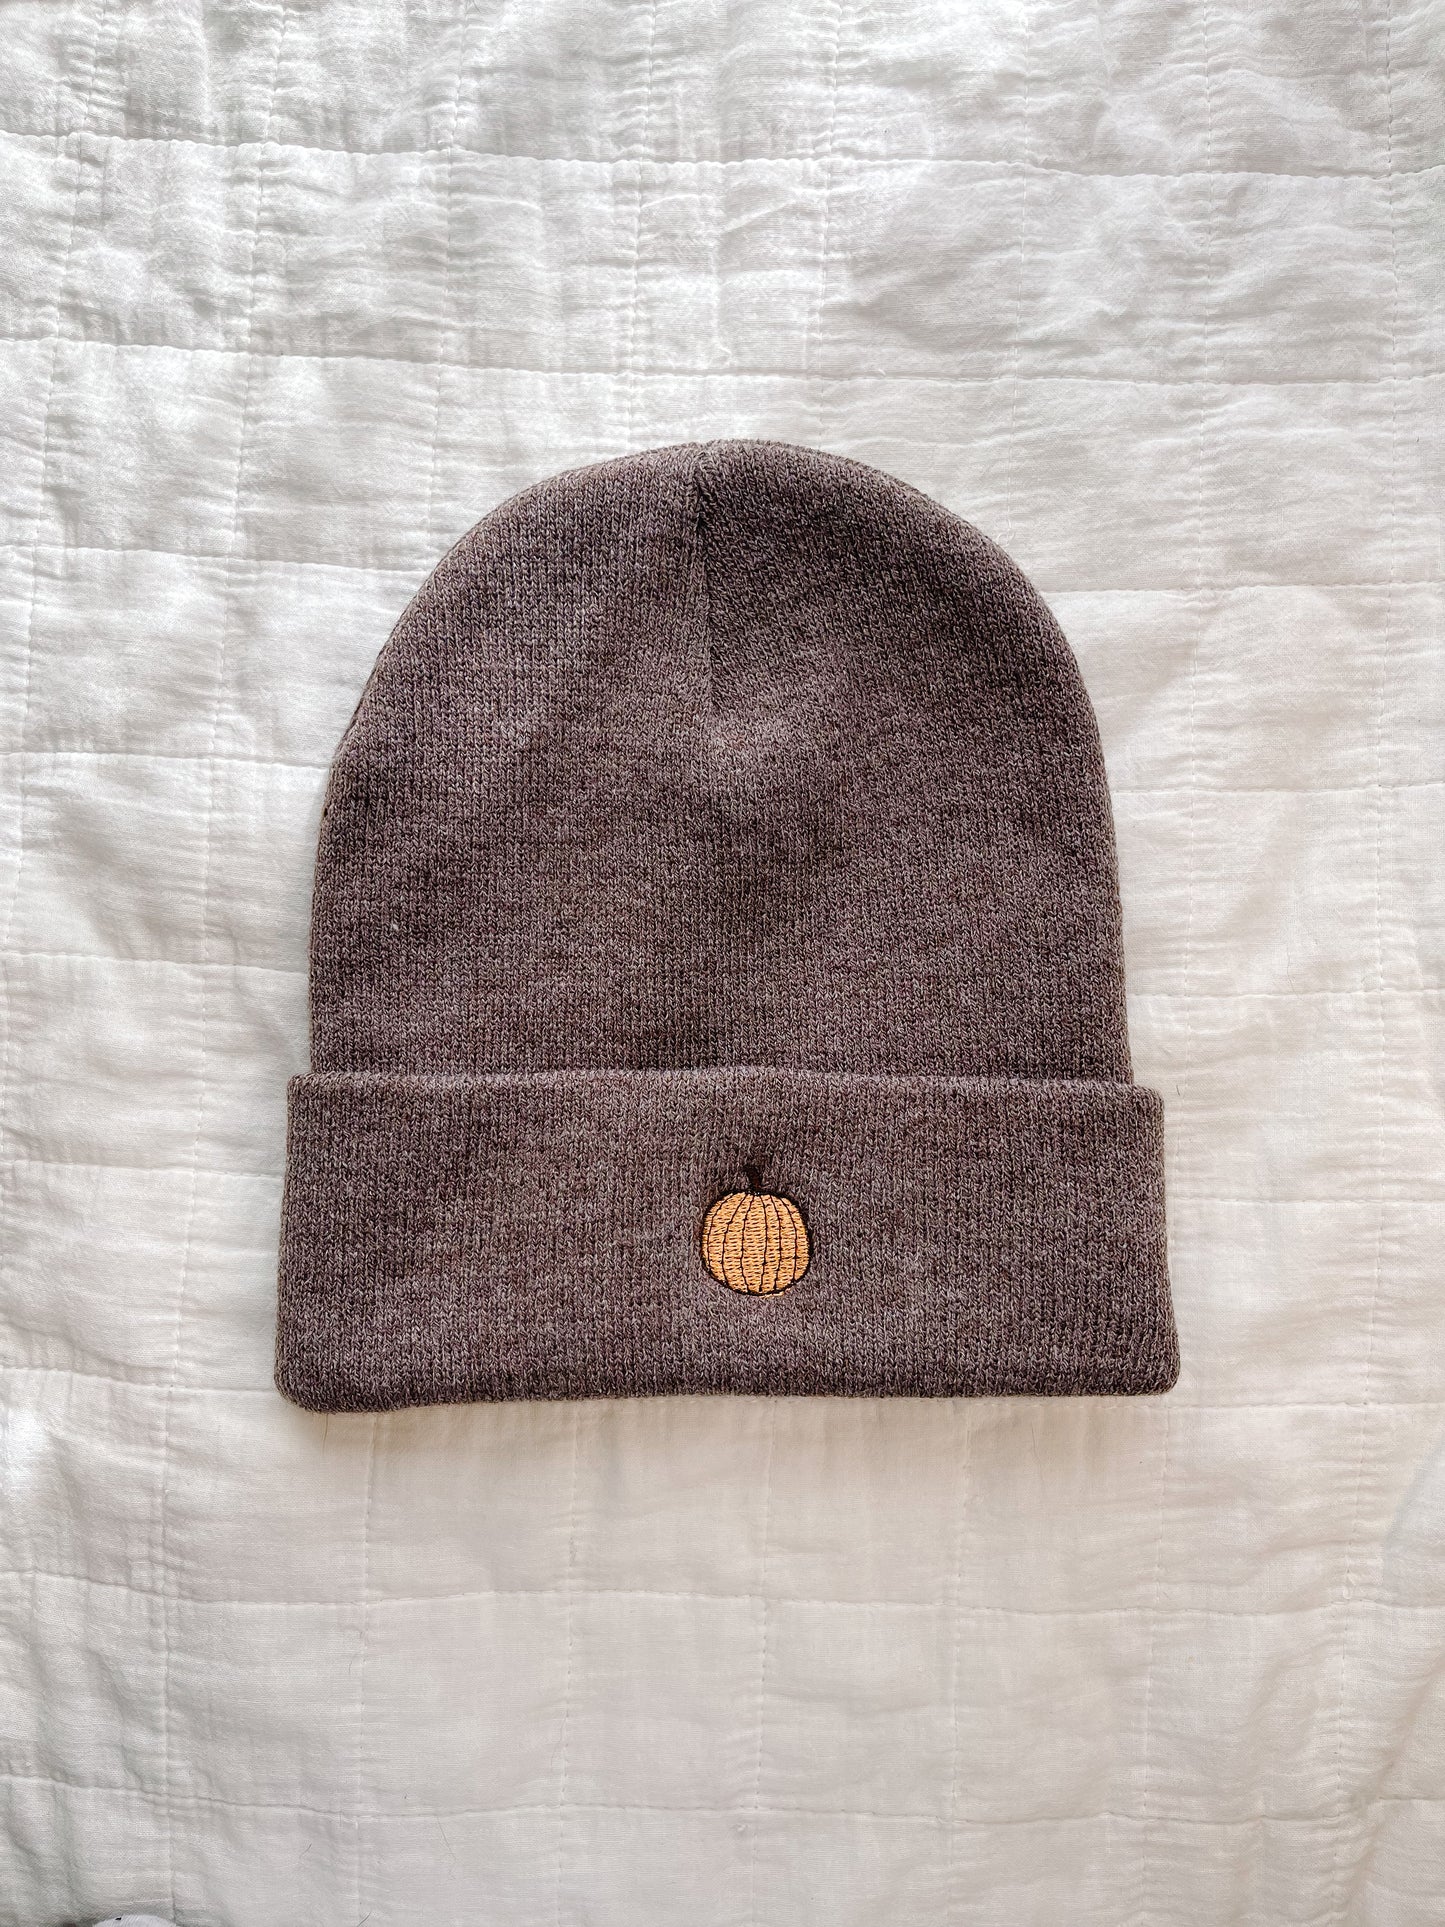 Embroidered Adult Beanie